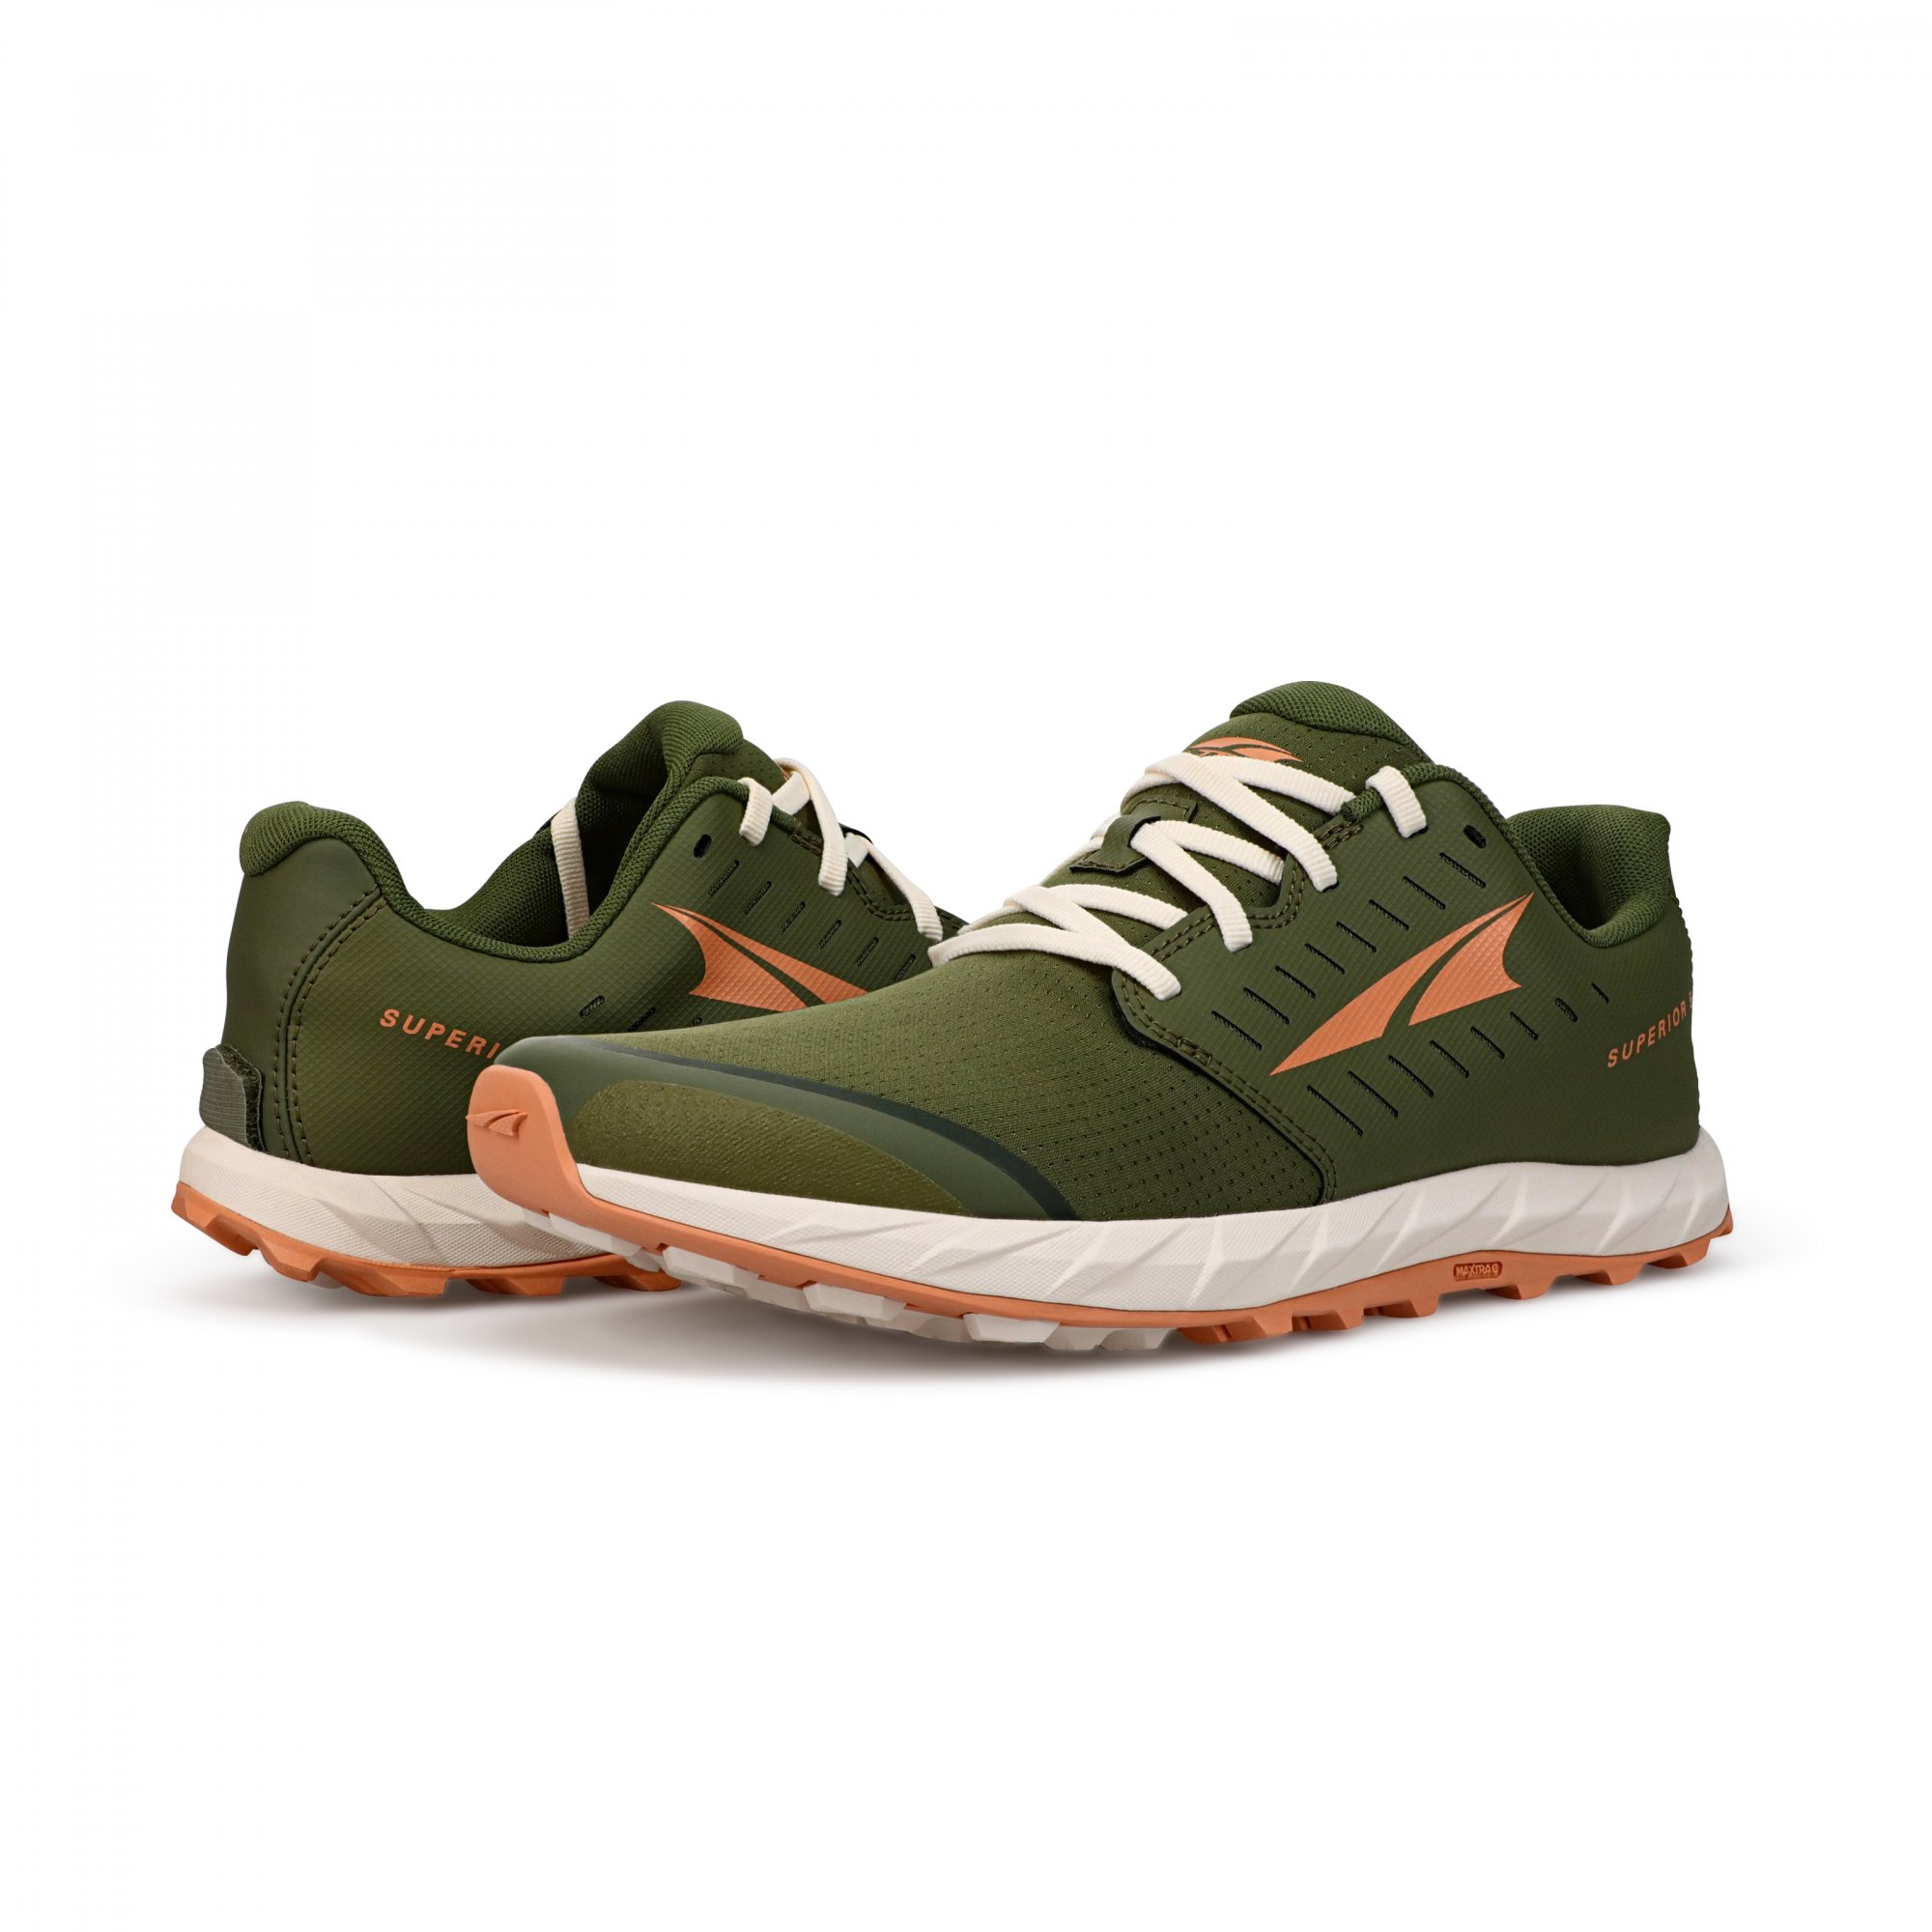 ALTRA Superior 5 - Dusty Olive (W)